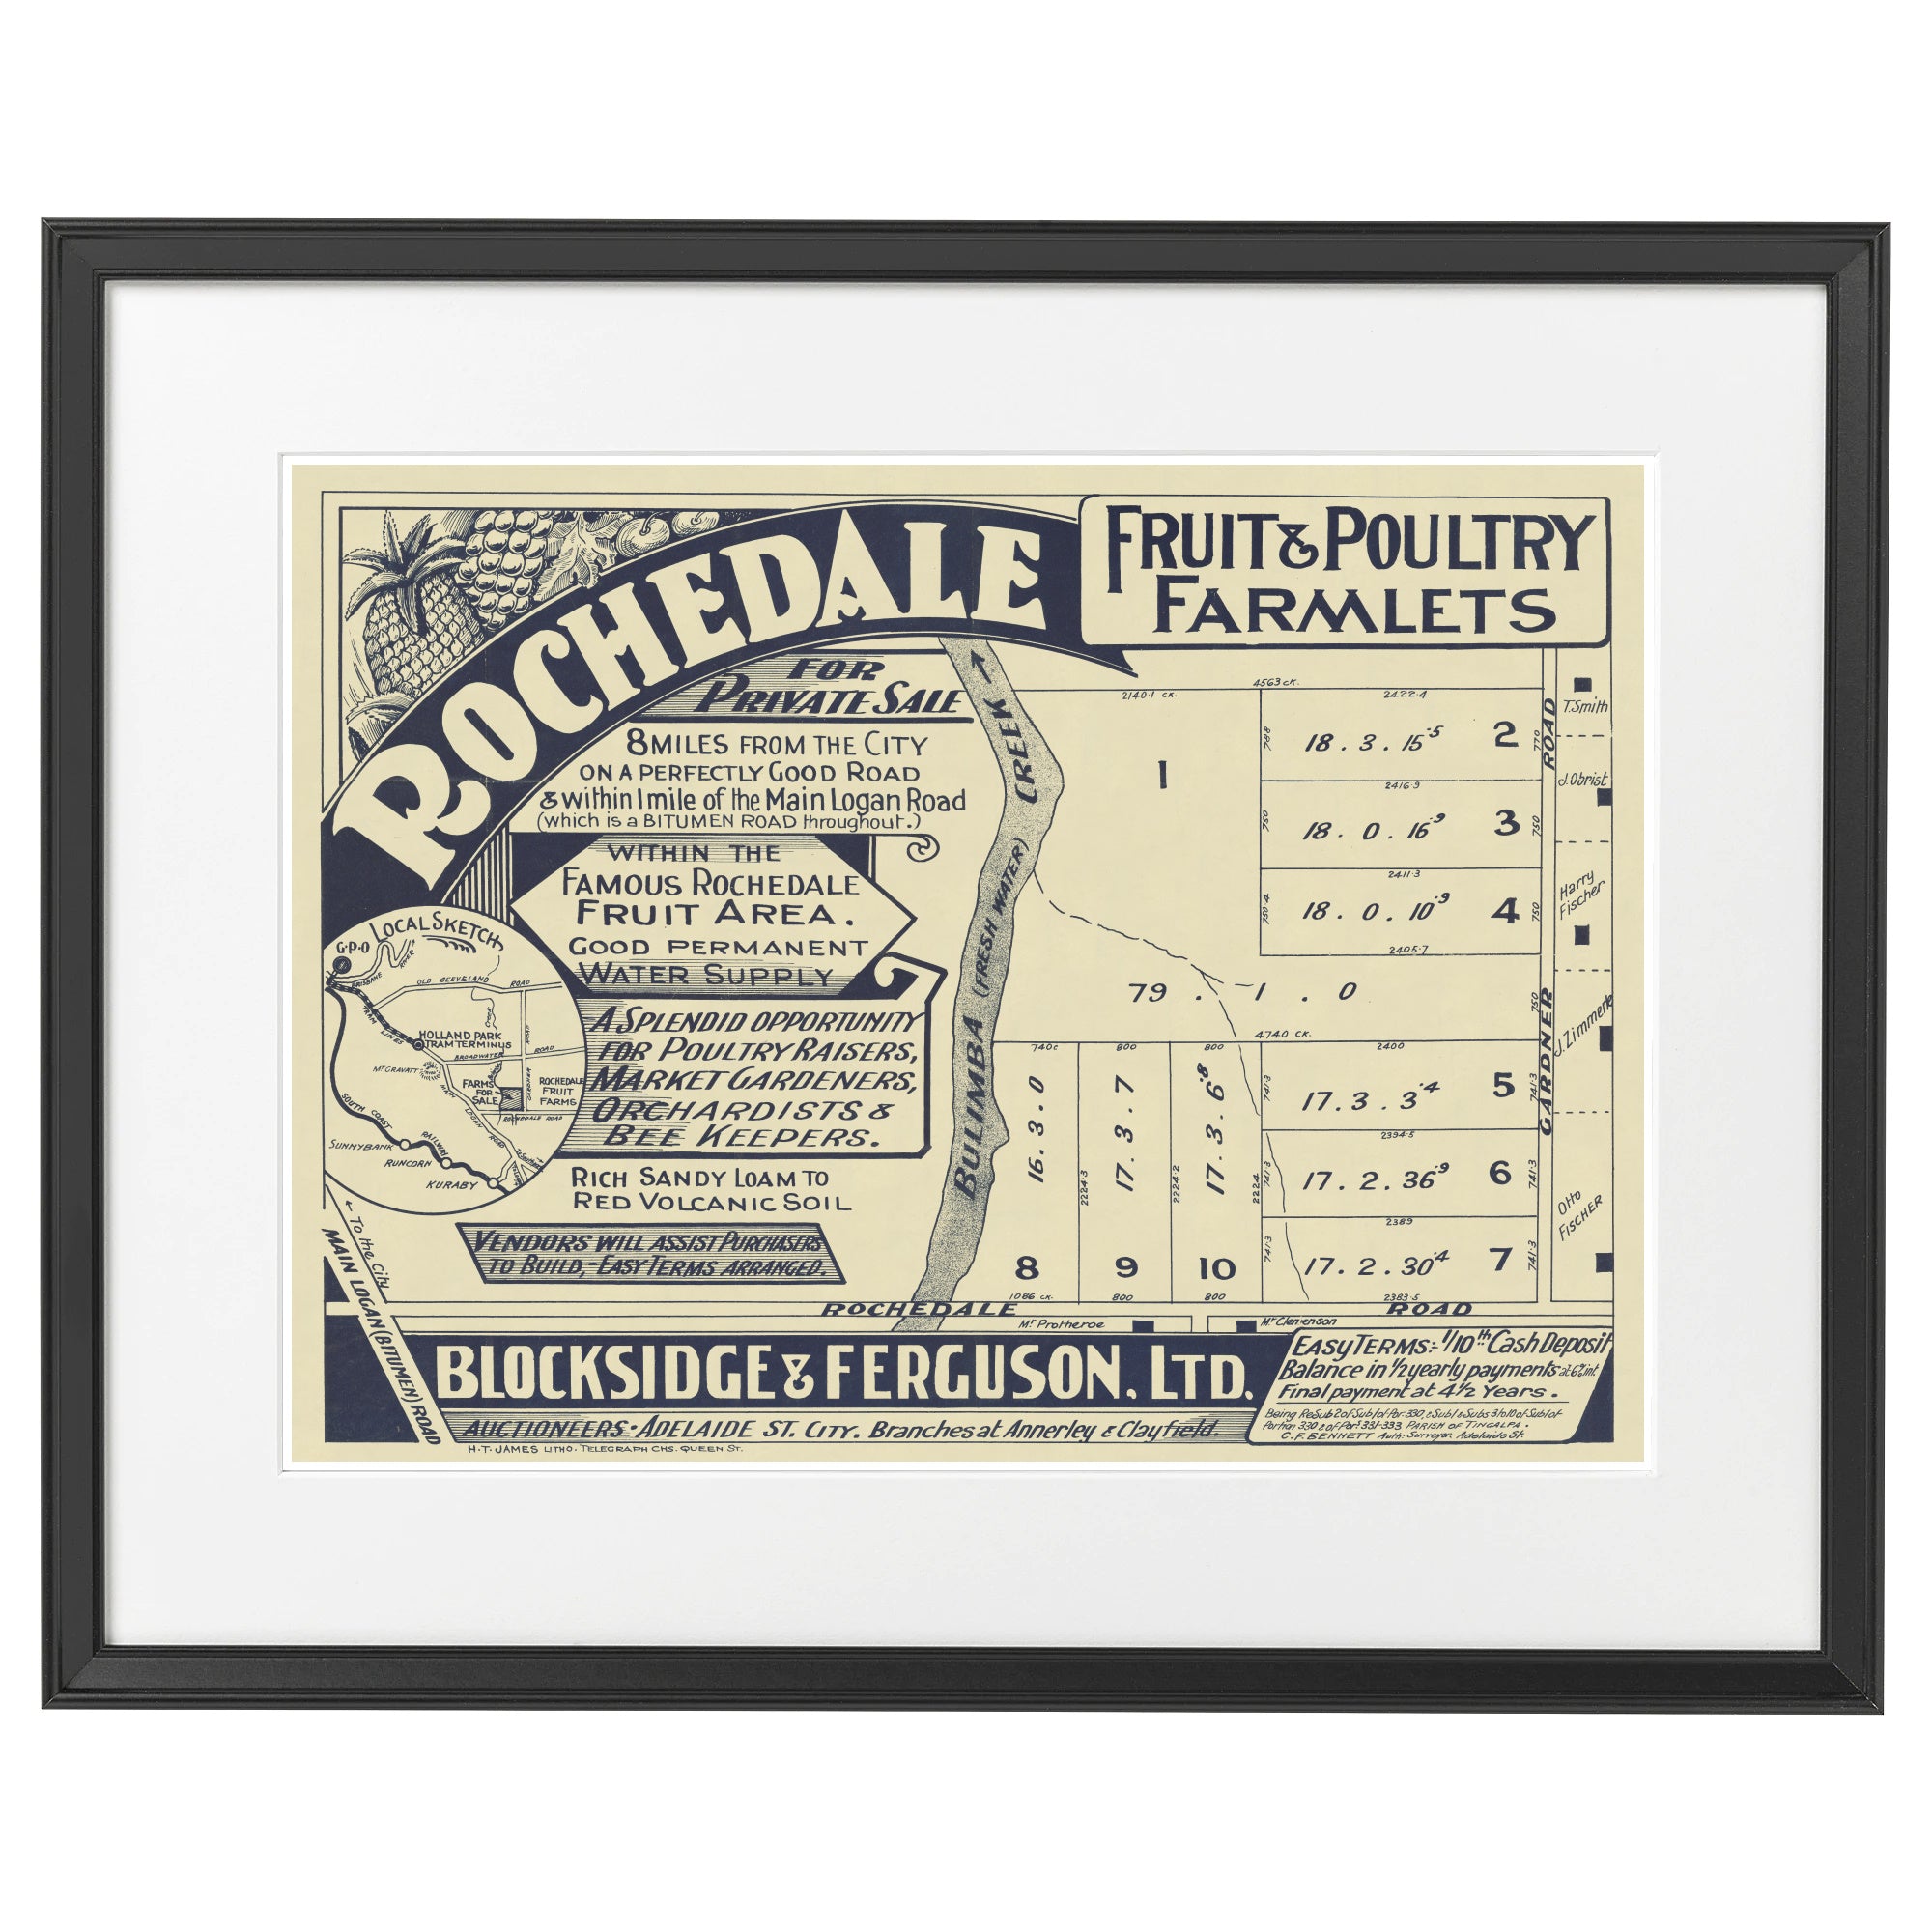 1930 Rochedale Fruit and Poultry Farmlets - 93 years ago today